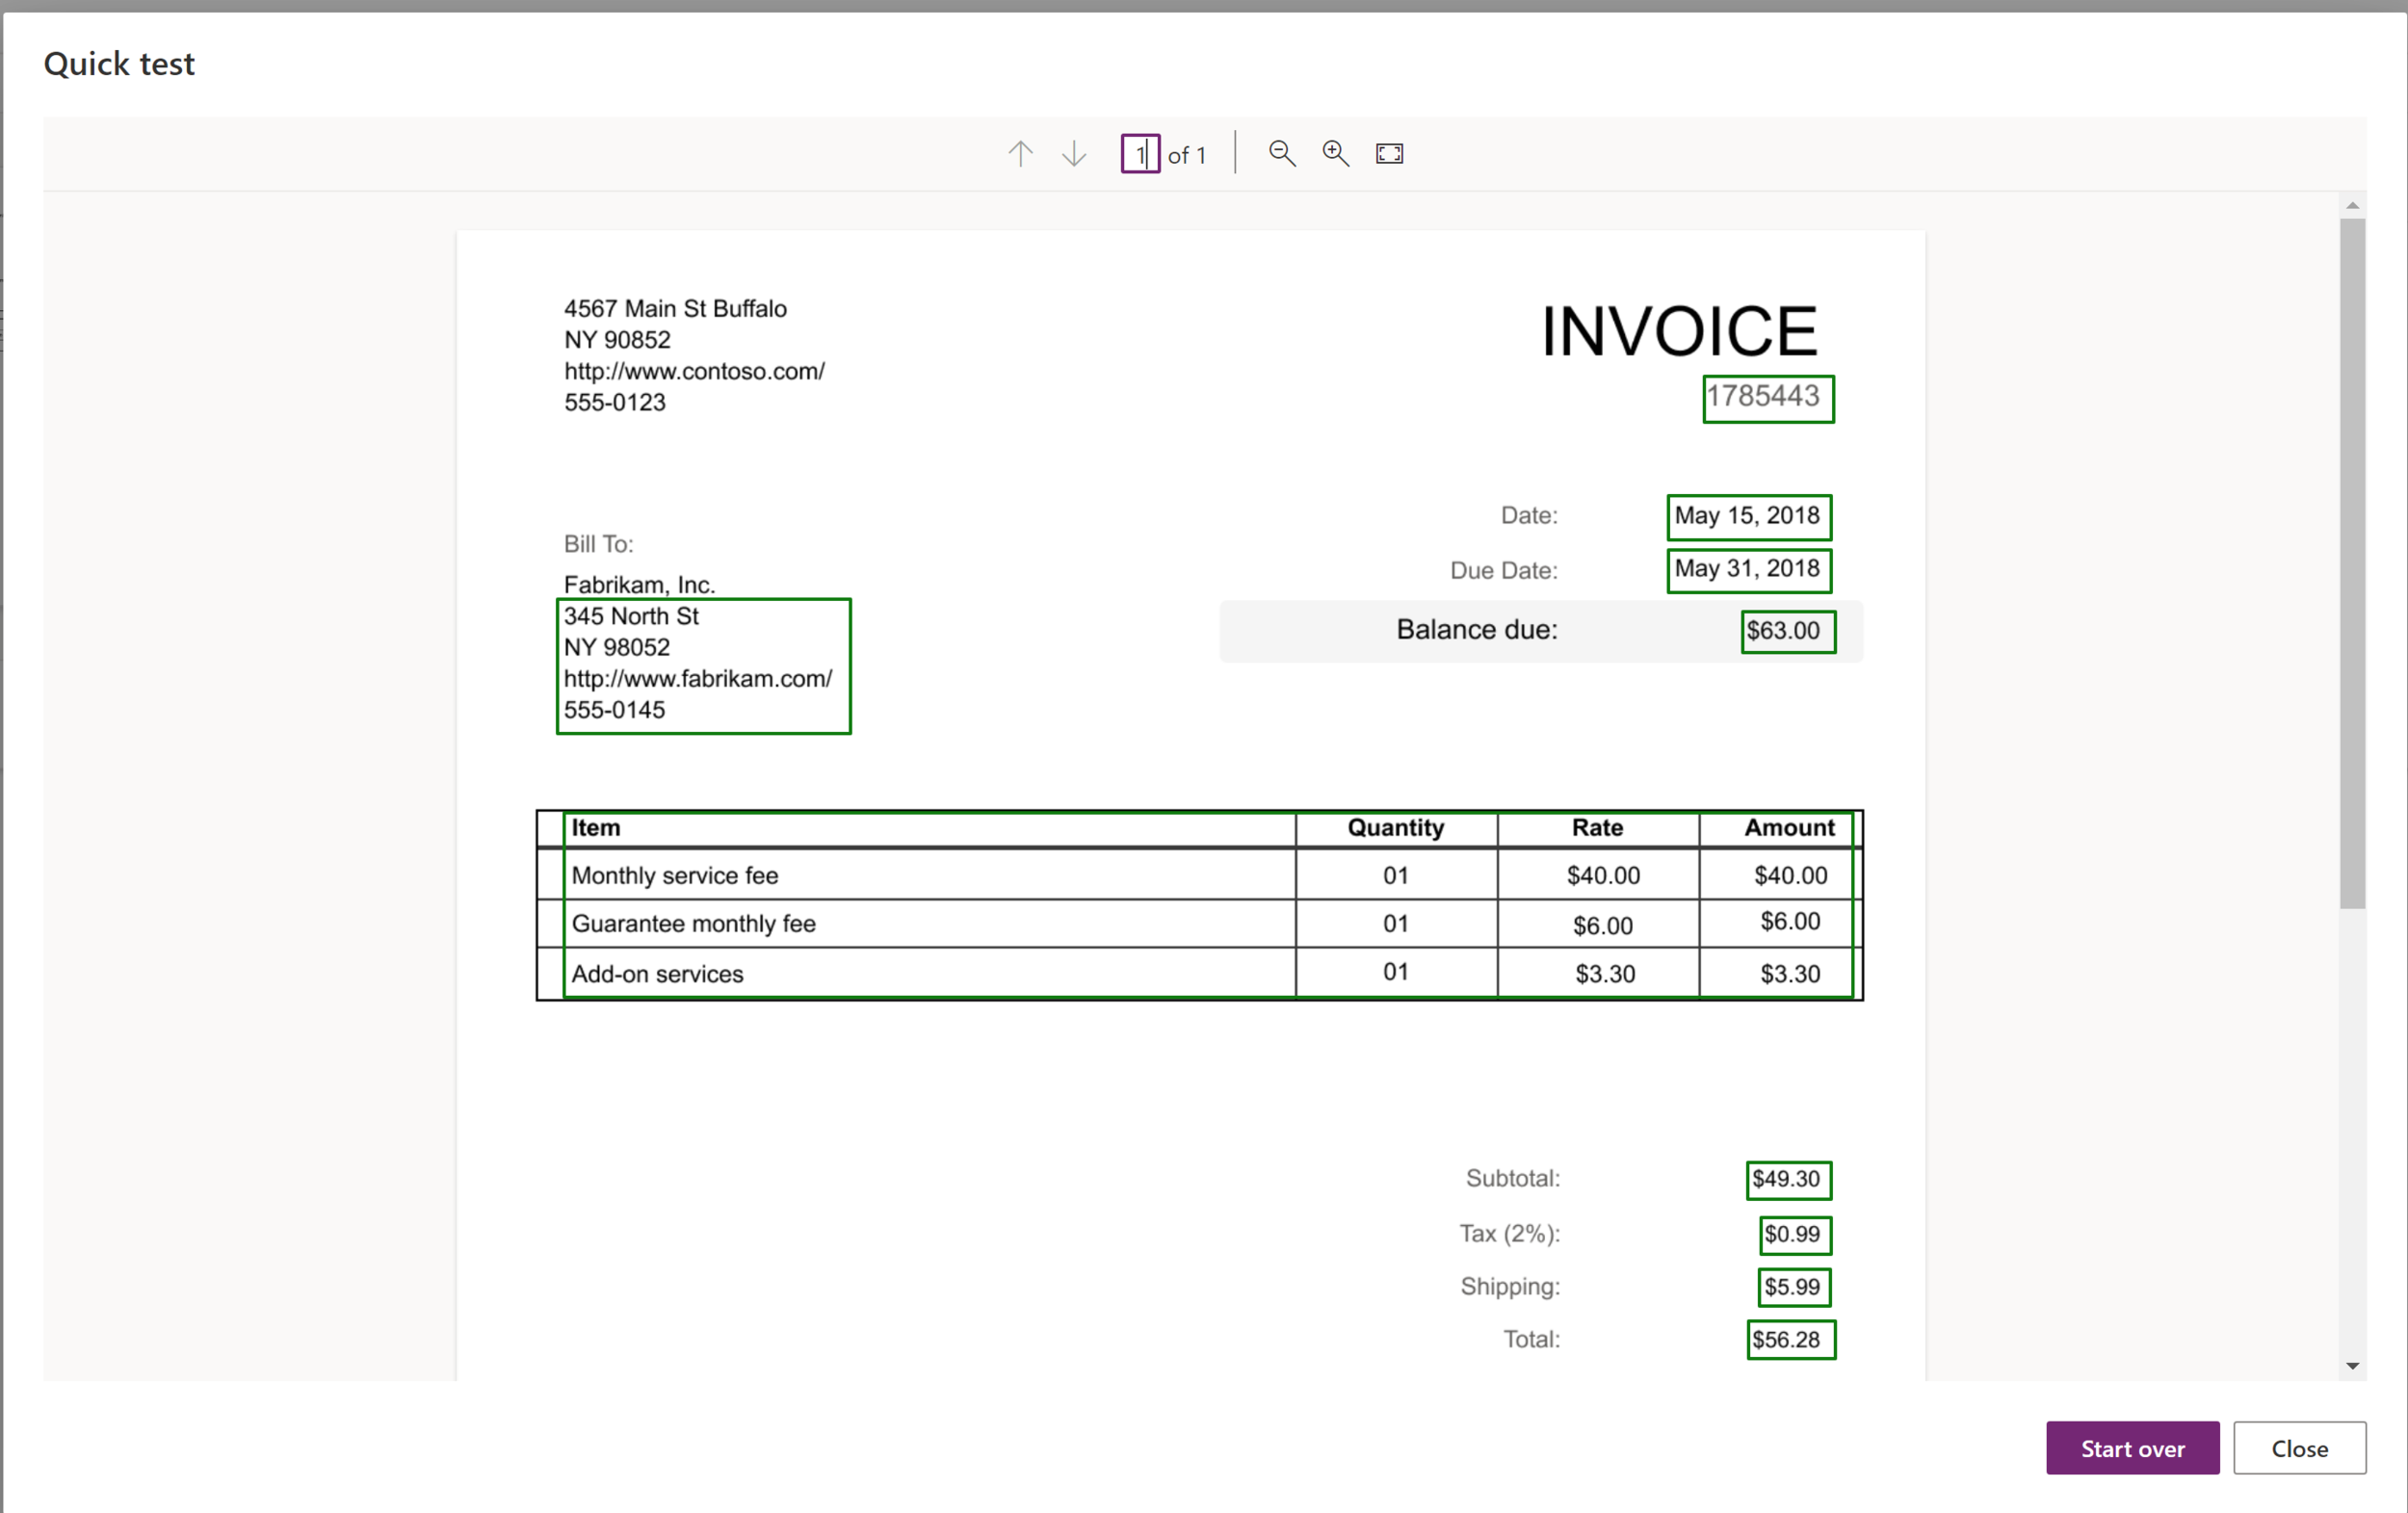 Test with a brand new unknown invoice